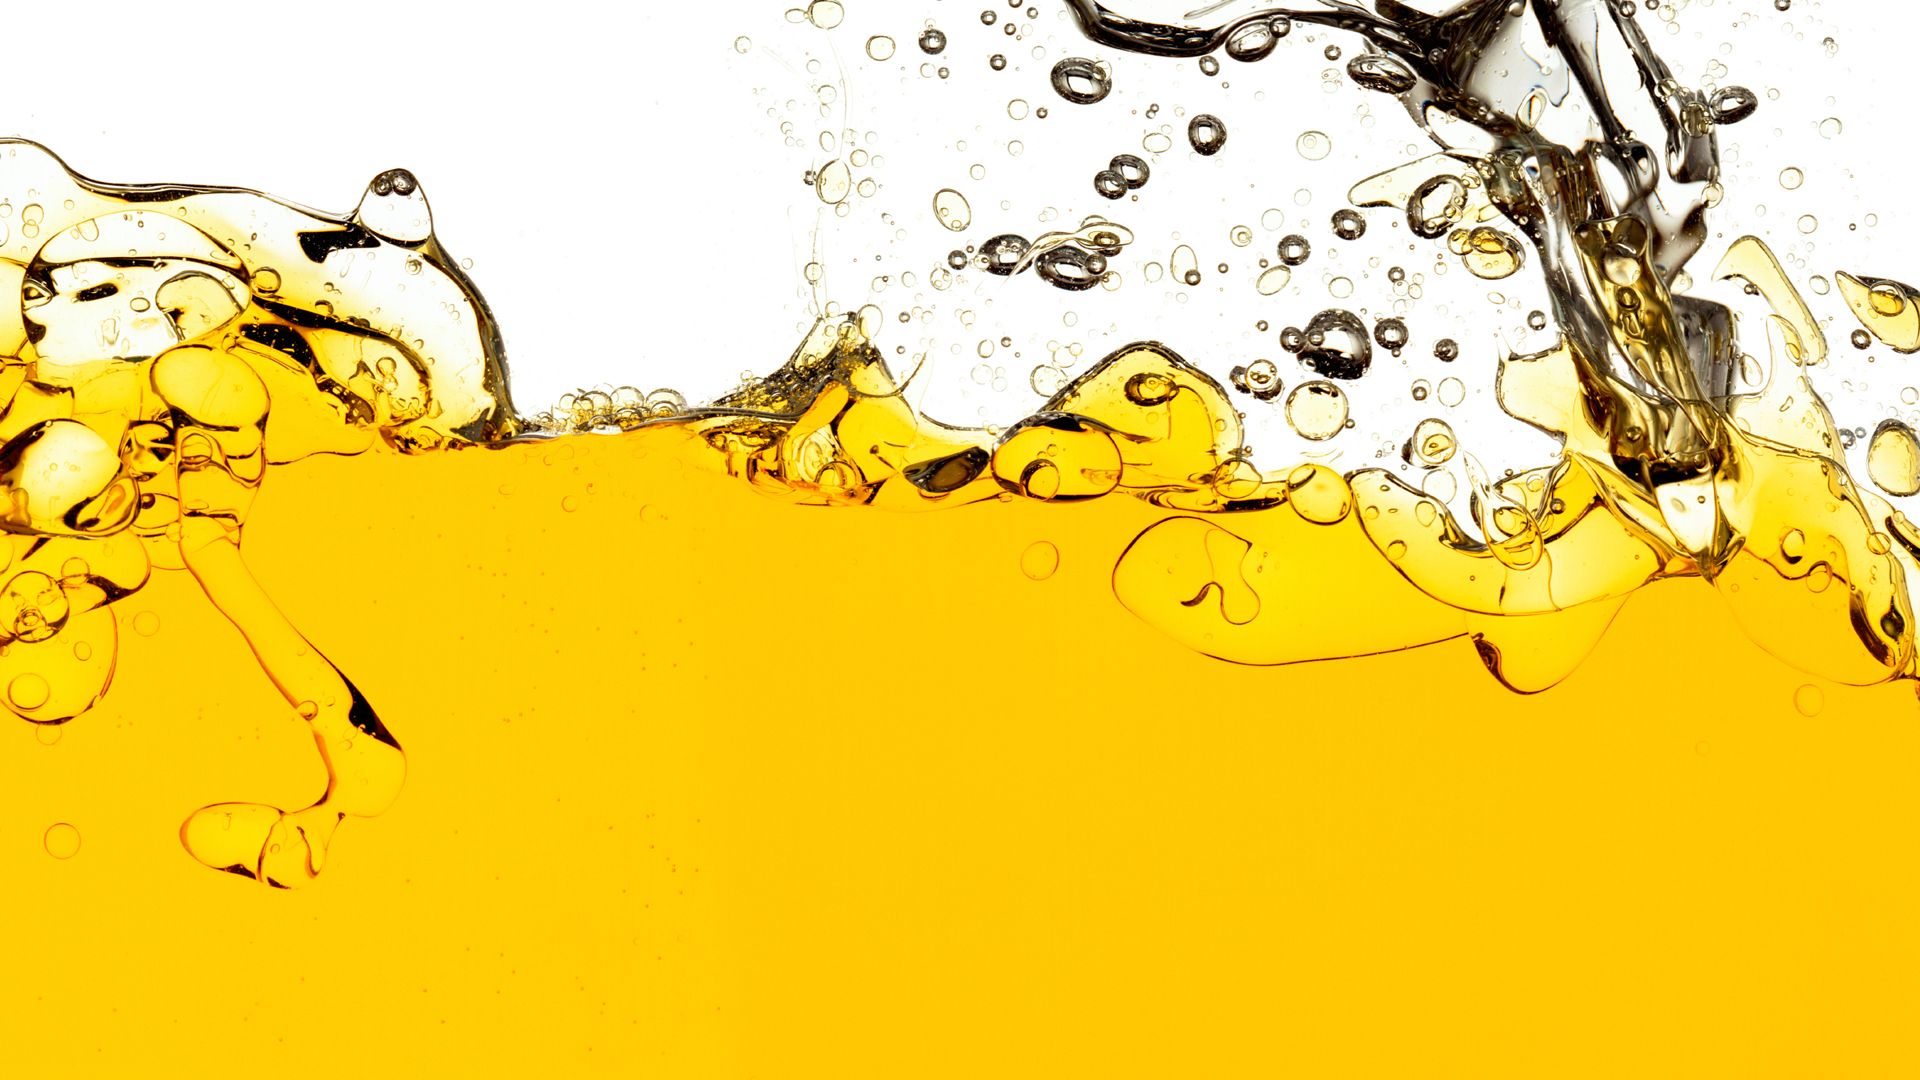 Used Cooking Oil and Grease Recycling Services in Baton Rouge, LA